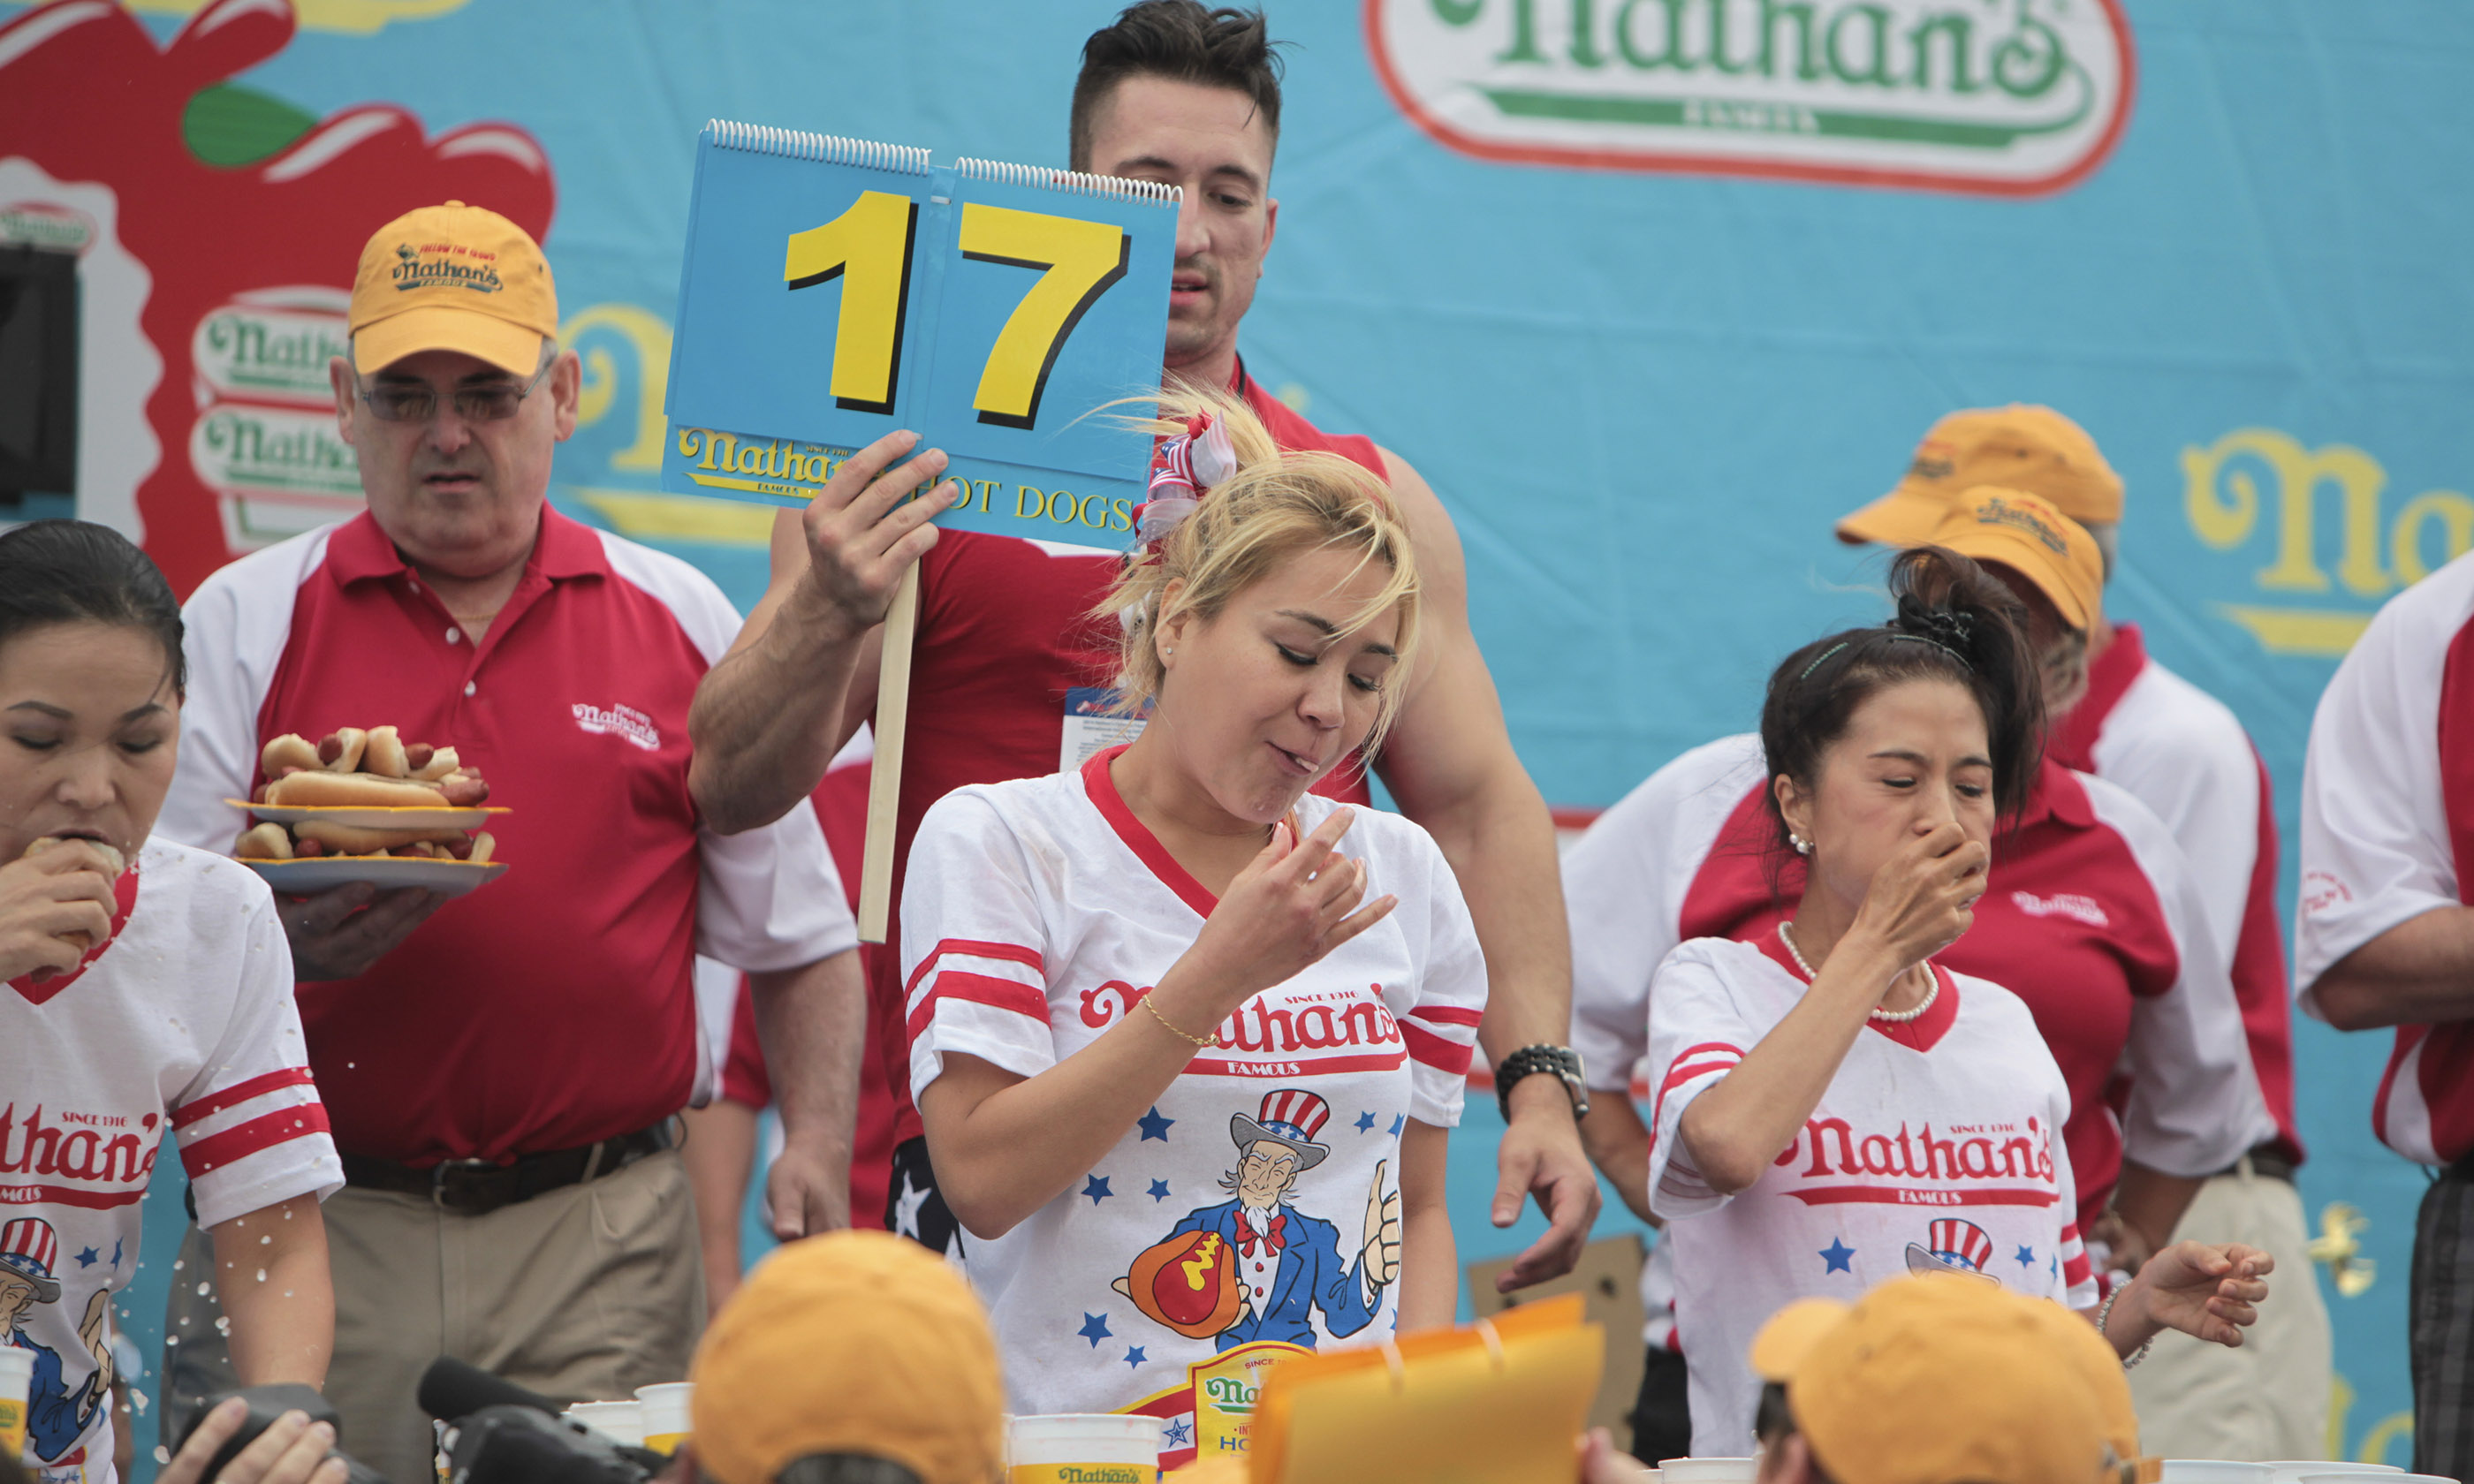 Nathan's annual Hot Dog Eating competition (Shutterstock: See main credit below)